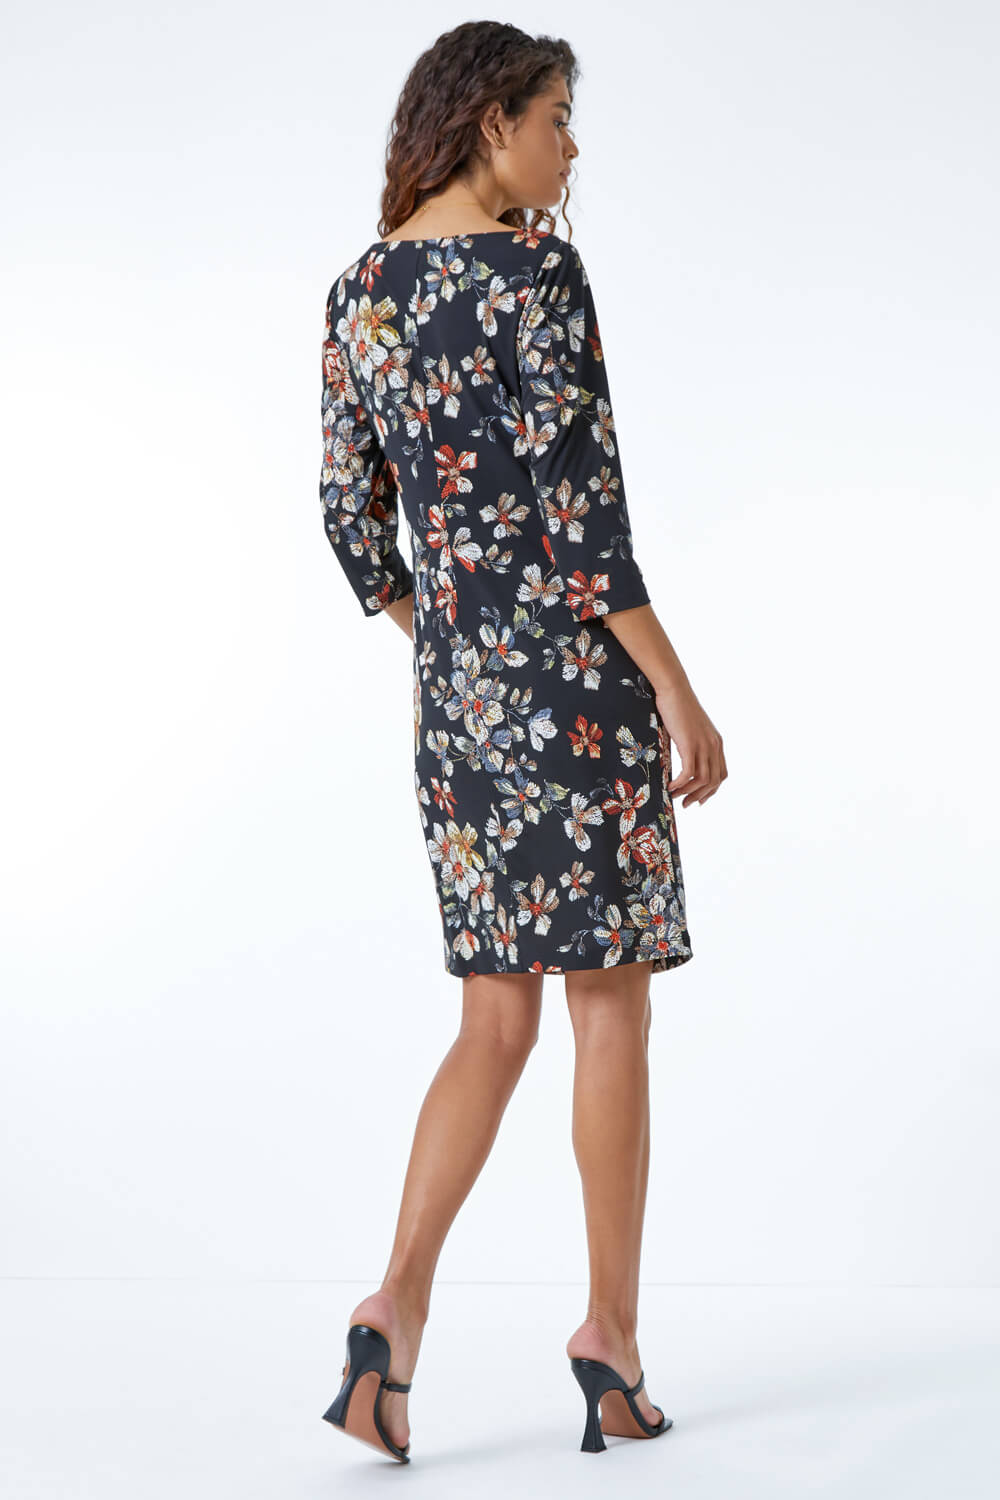 Black Textured Floral Print Ruched Waist Dress, Image 2 of 5